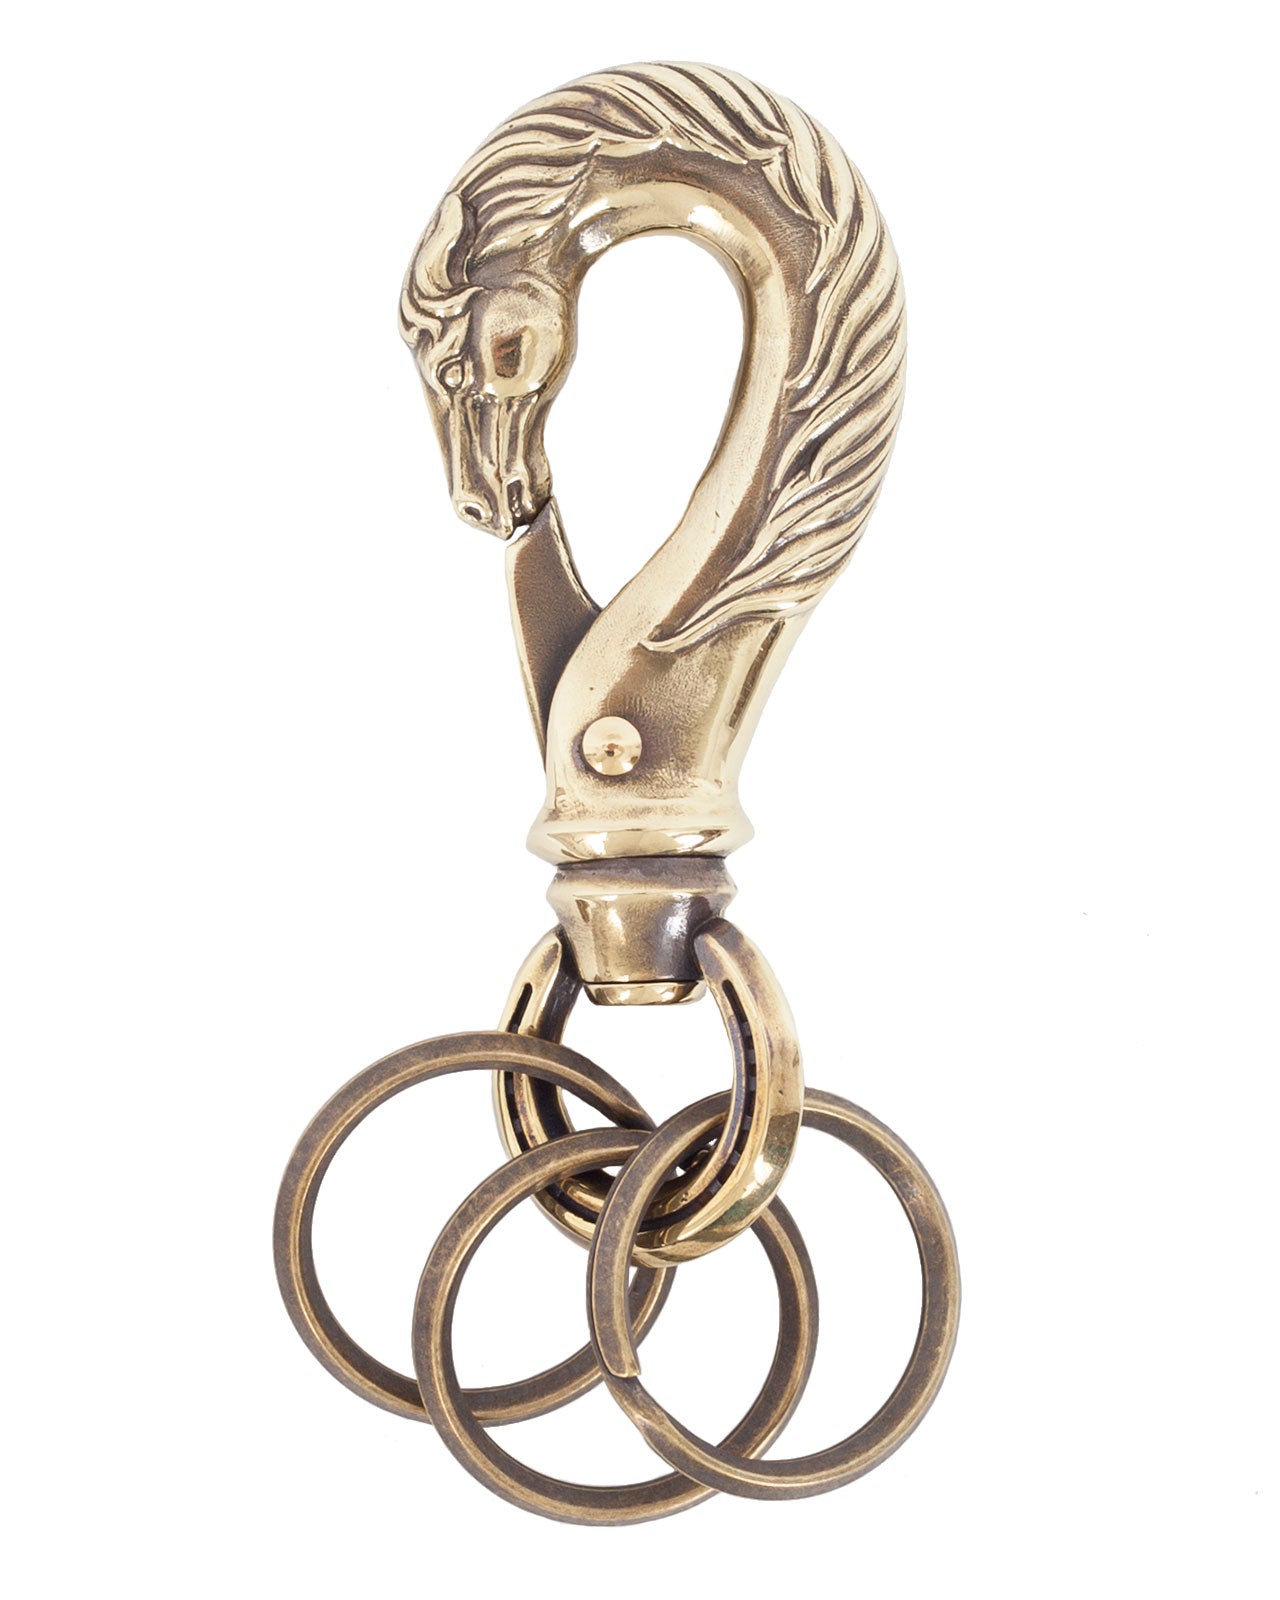 Peanuts & Co Horse Hook Large, Brass